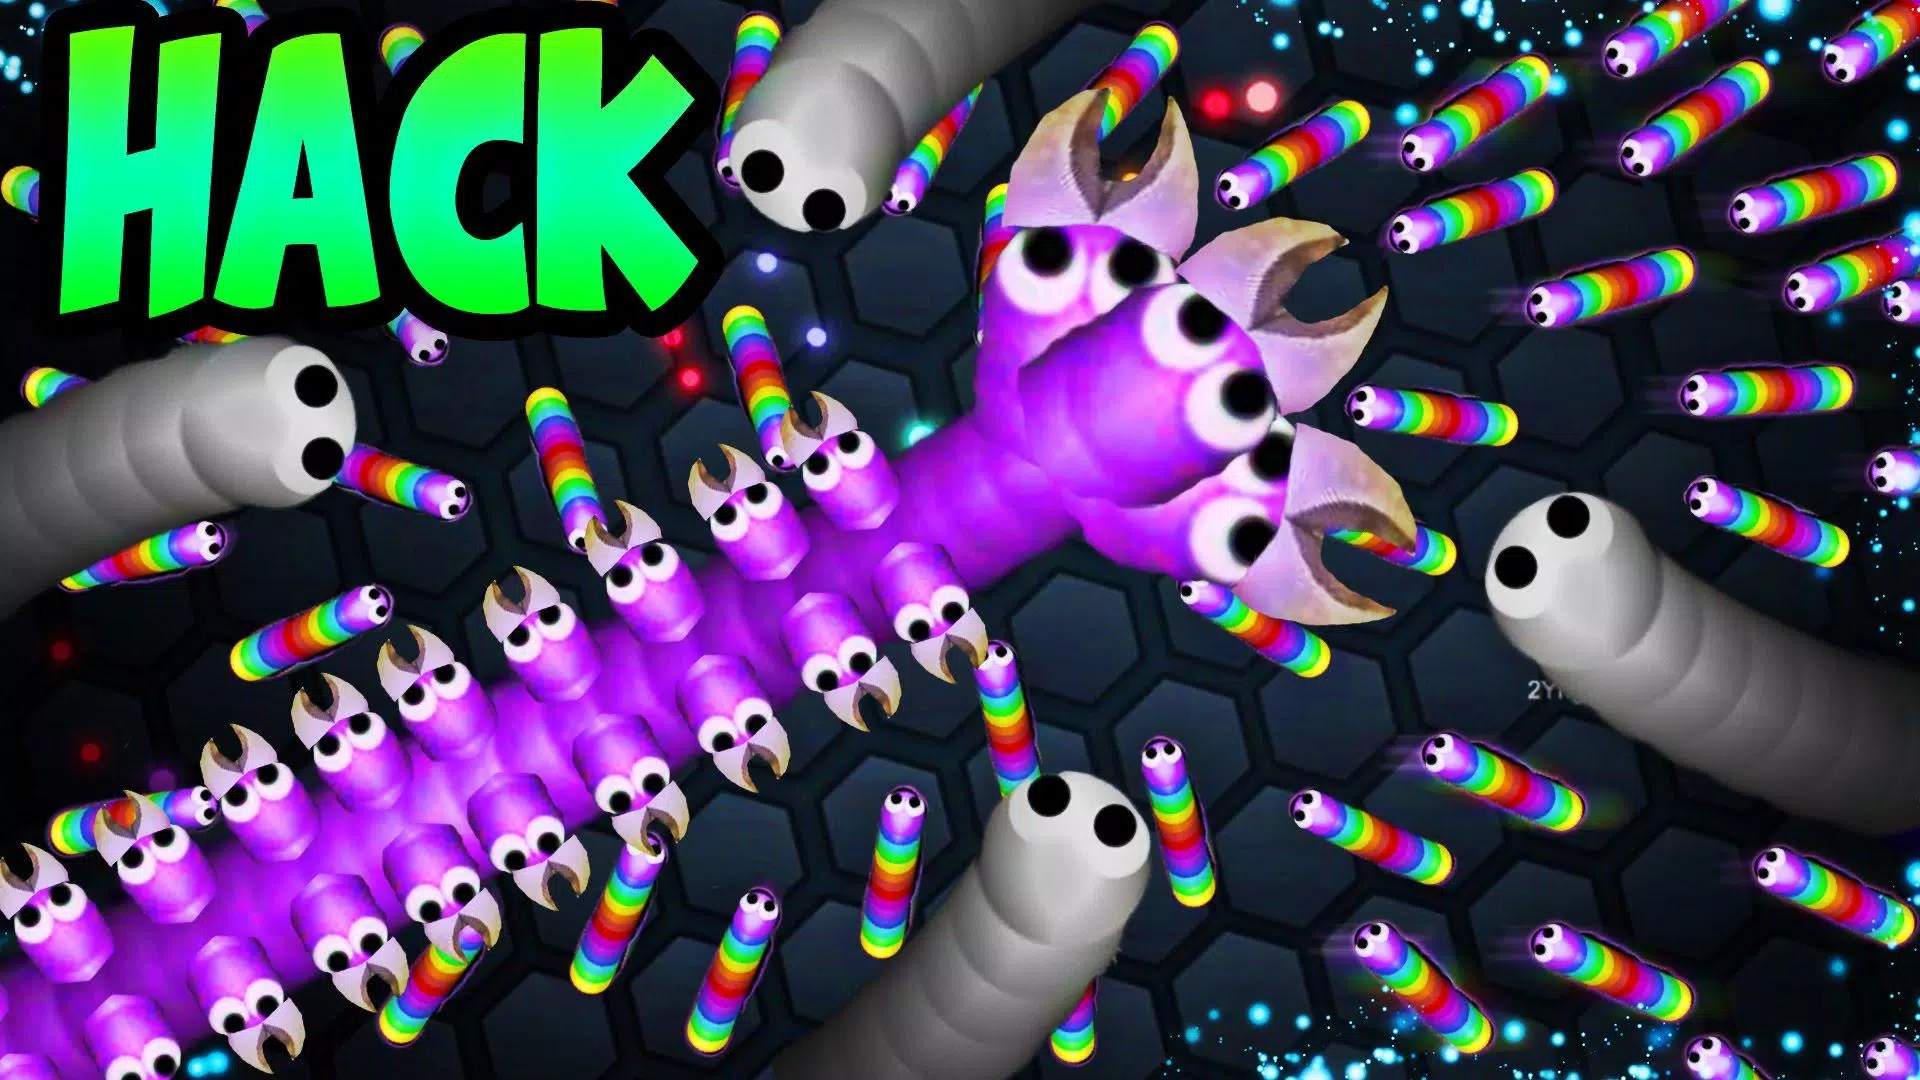 Slither.io APK Hack Mod Android  Slitherio, Slitherio game, Slither io  hacks